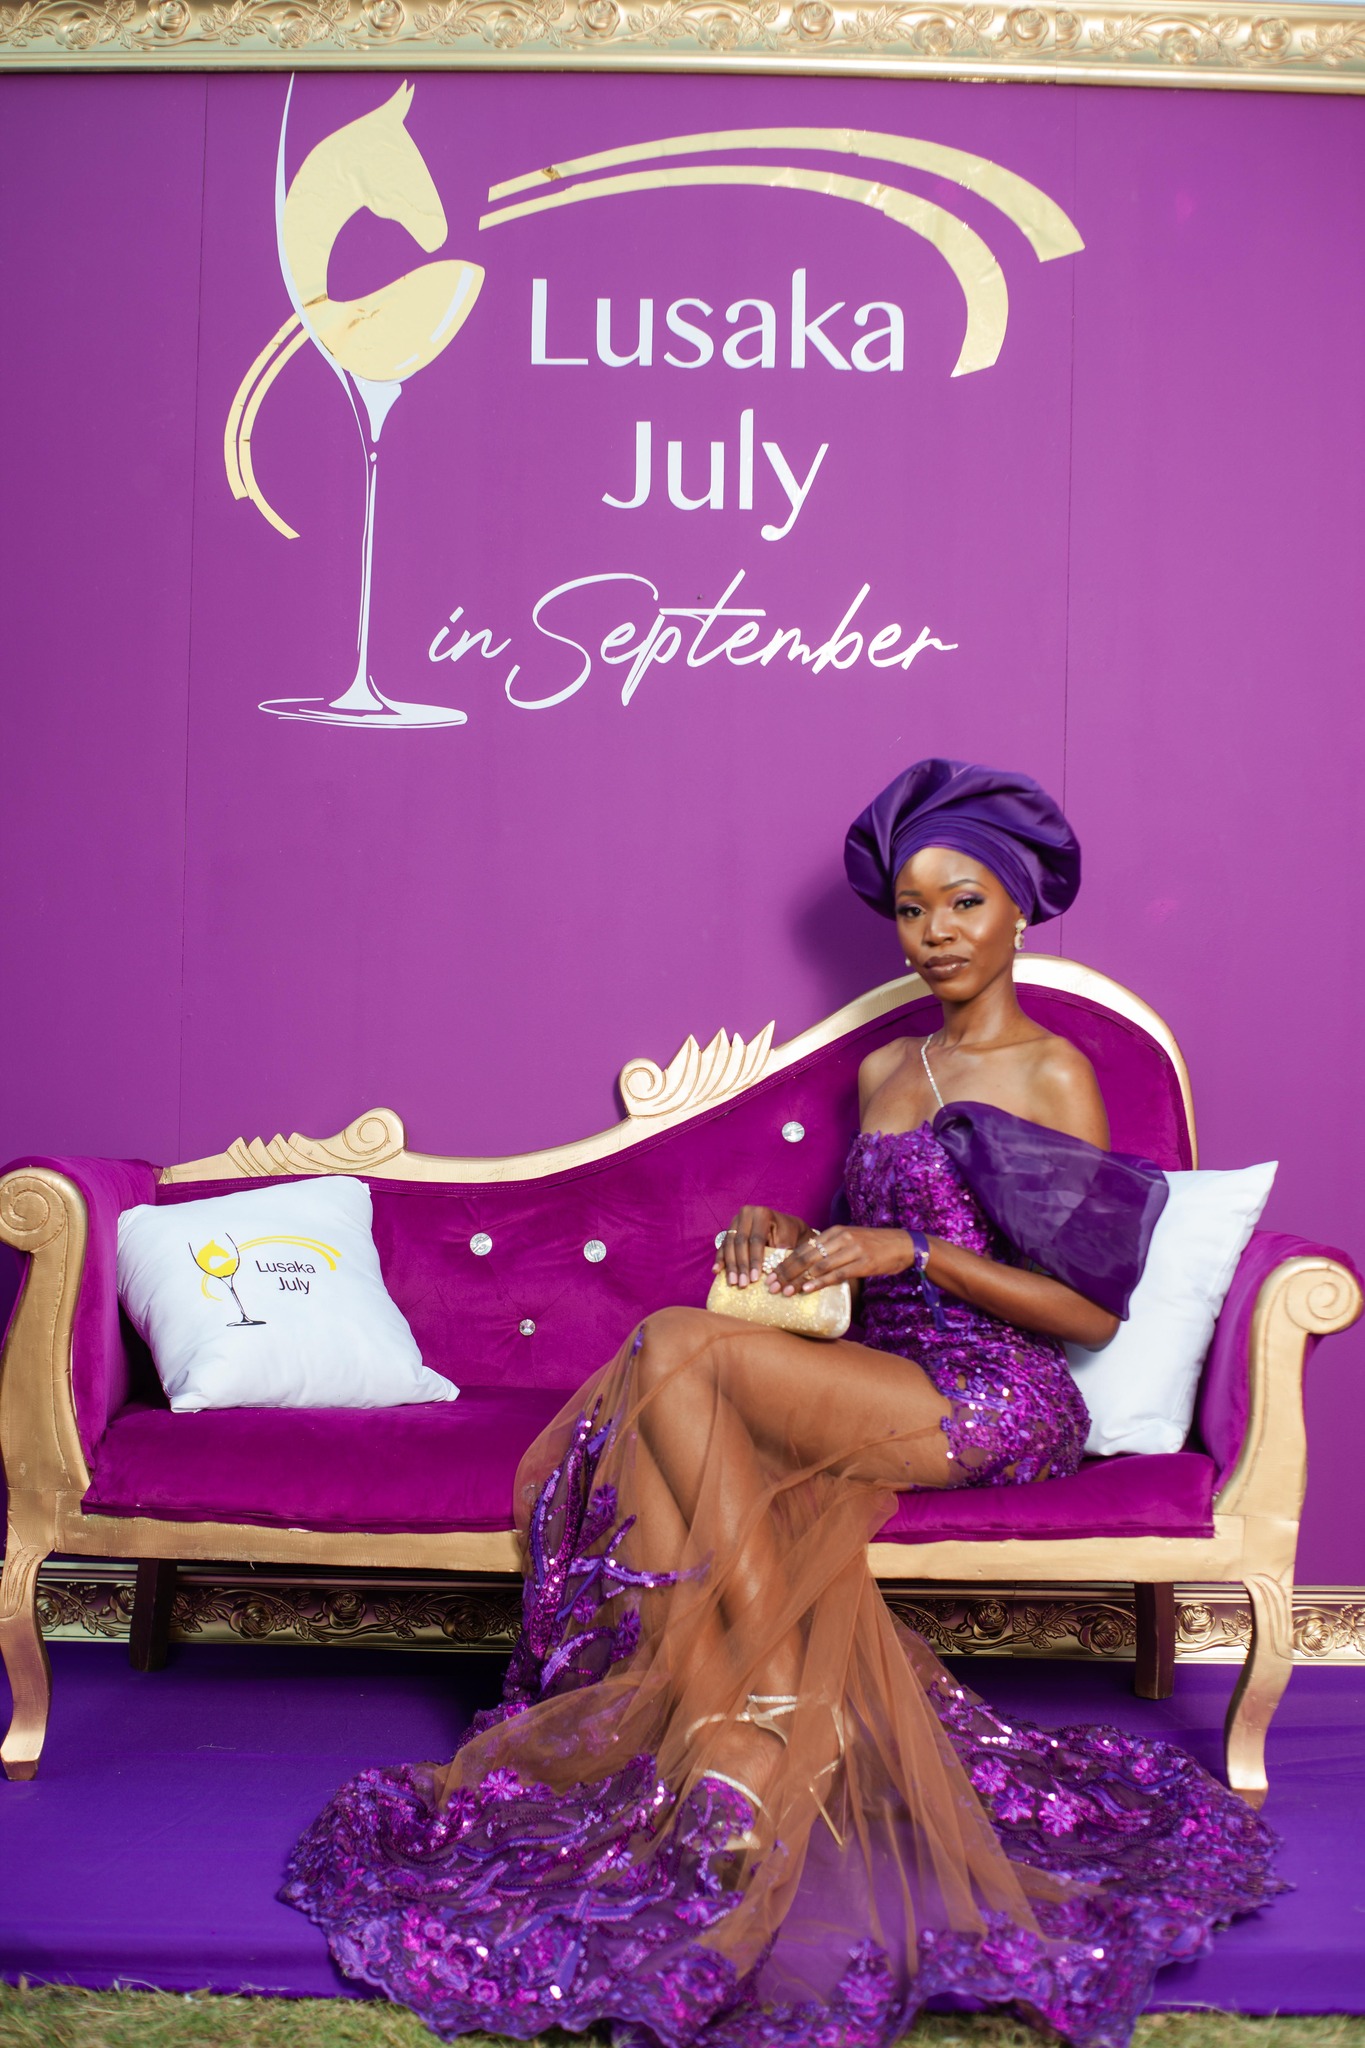 A purple fever with Lusaka July